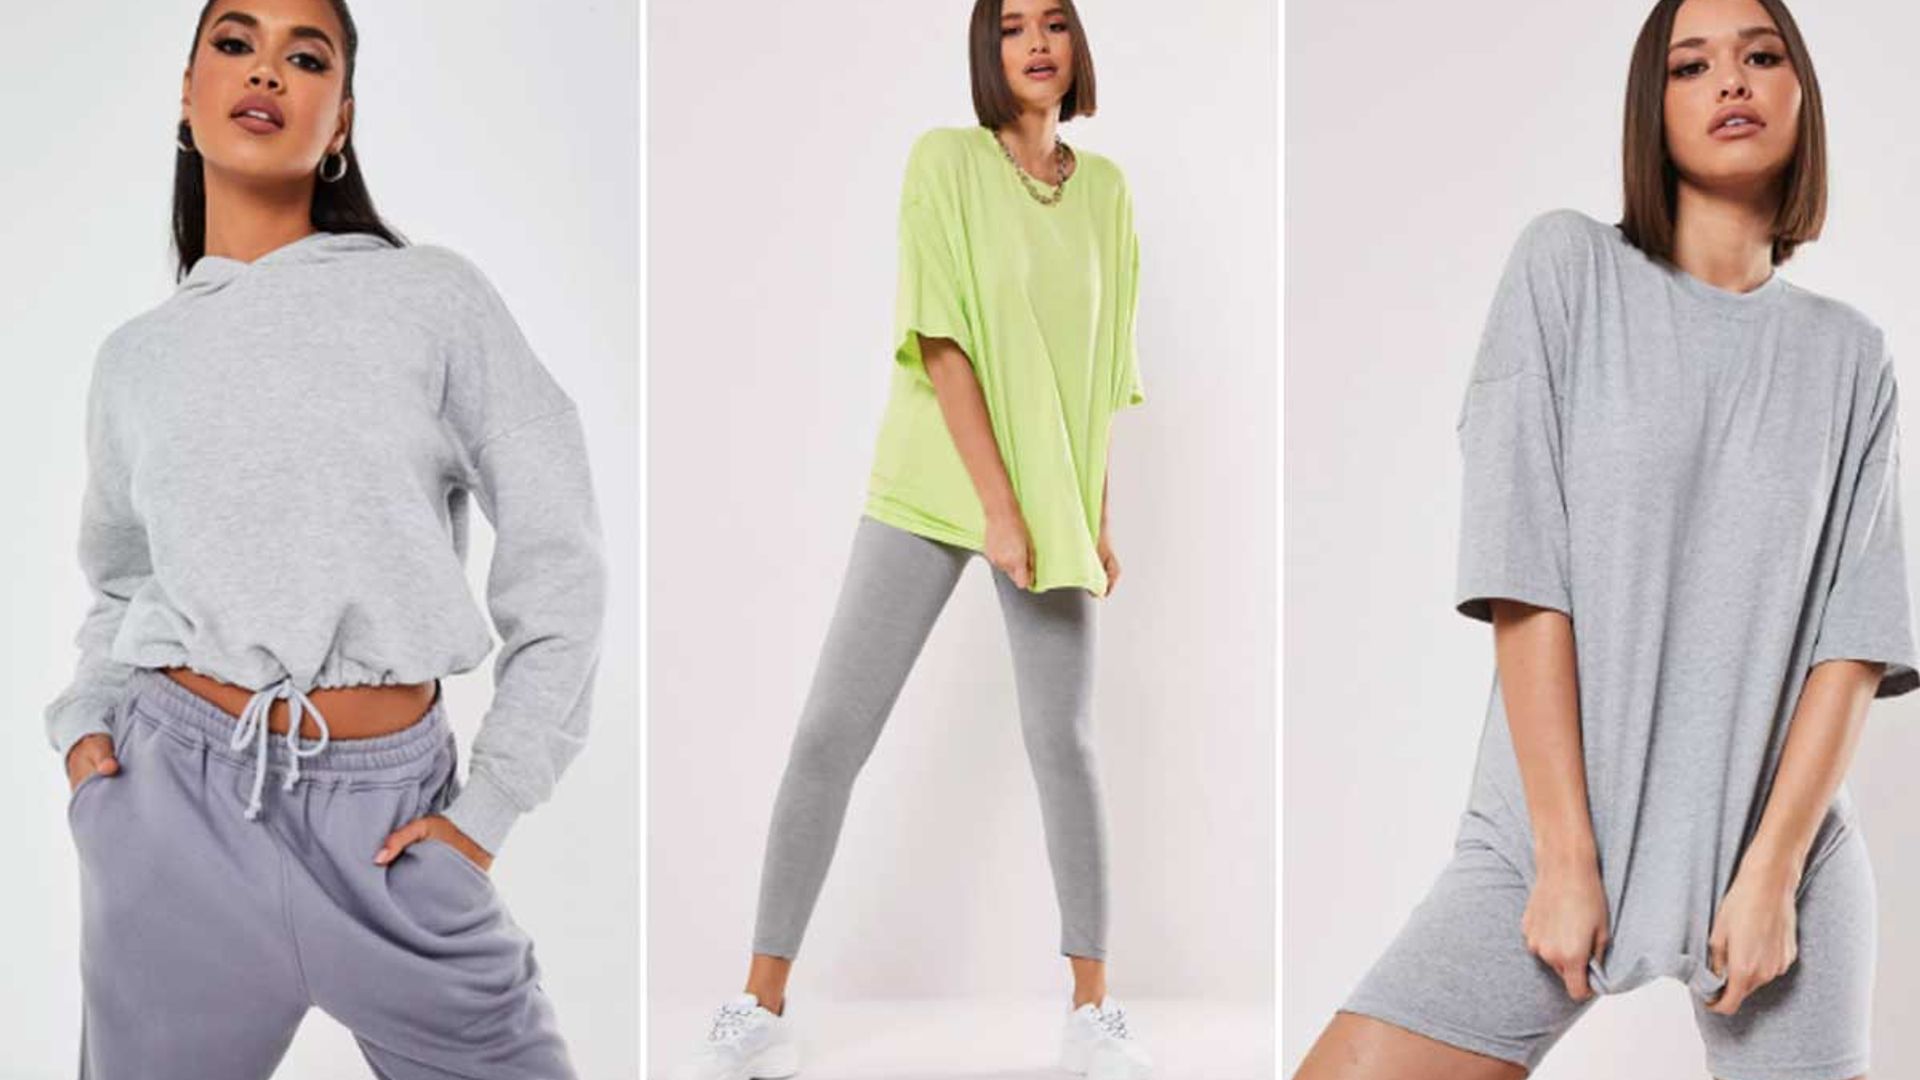 Mrs Hinch's favourite store Missguided has launched a 'working from home'  section featuring comfy loungewear